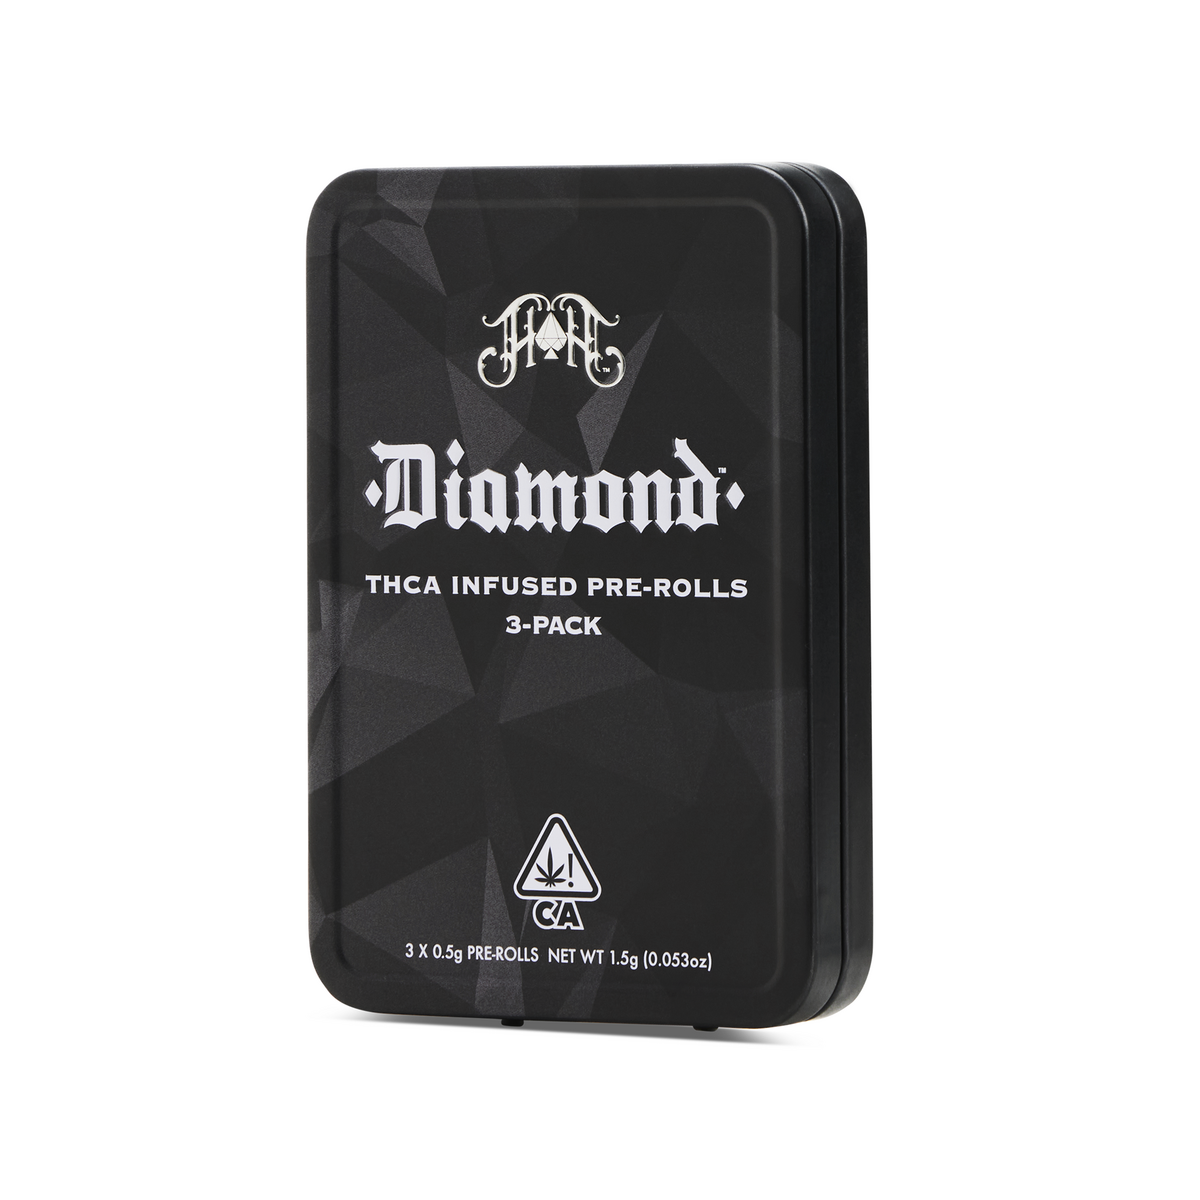 Private Reserve | Indica - Diamond THCA-Infused Pre-Rolls - 1.5G Three-Pack